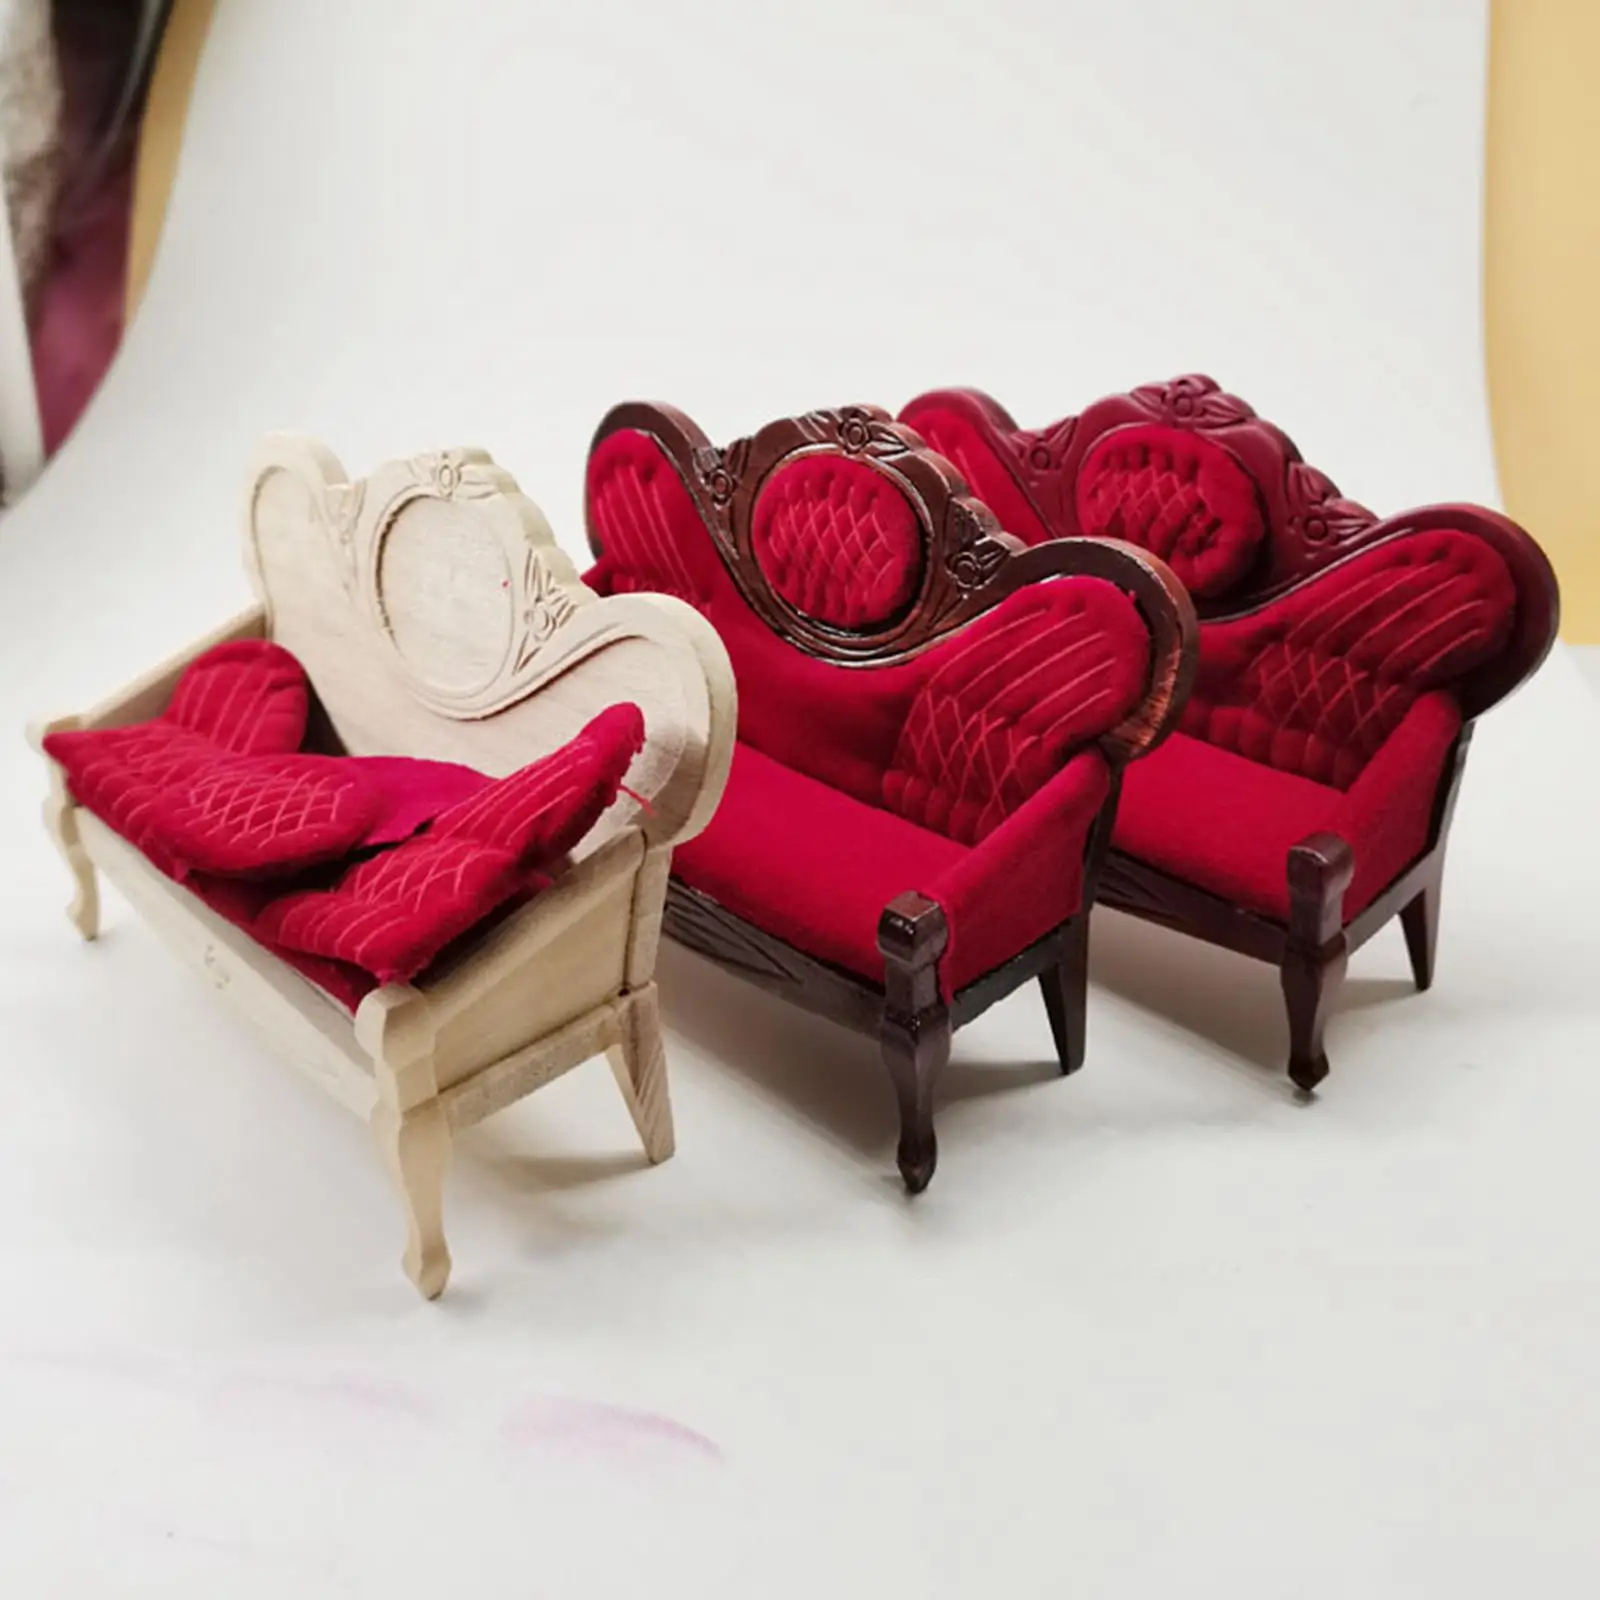 Mini Dollhouse Sofa Toy Accessory Furniture Model DIY 1/12 Scale Armchair Couch for Living Room Bedroom Landscape Home Decor